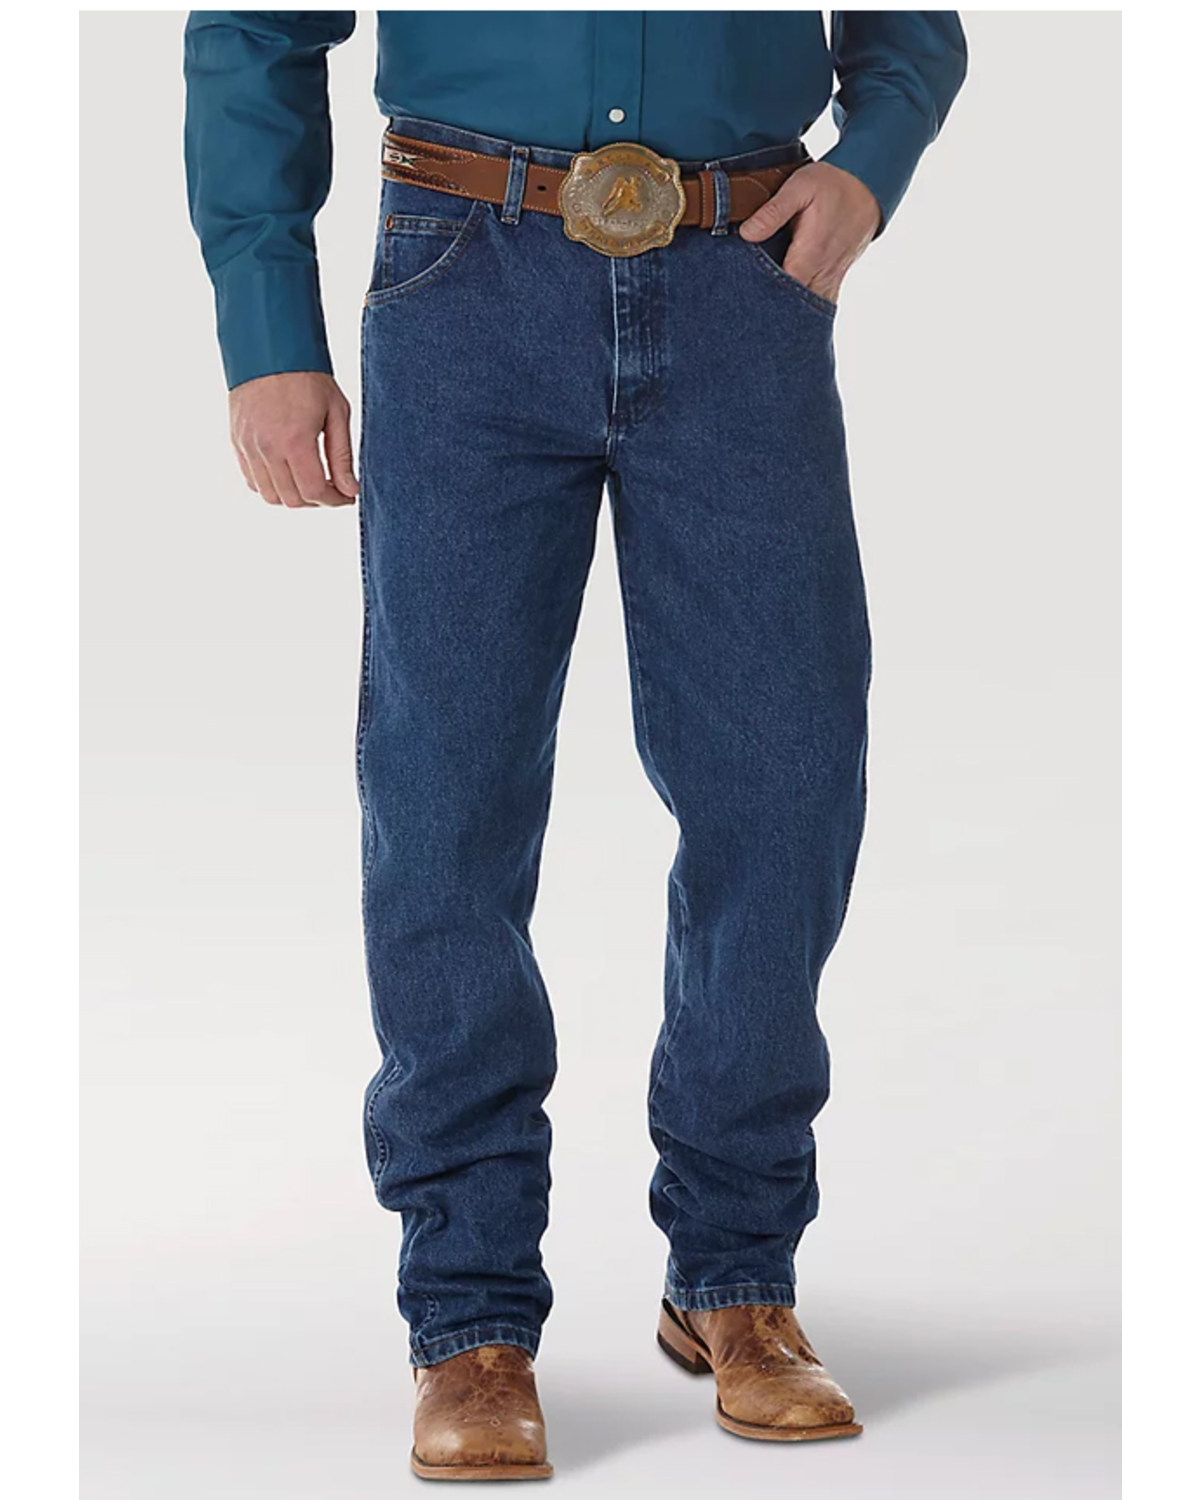 Wrangler Men's Pro Rodeo Competition Cowboy Cut Relaxed Fit Jeans